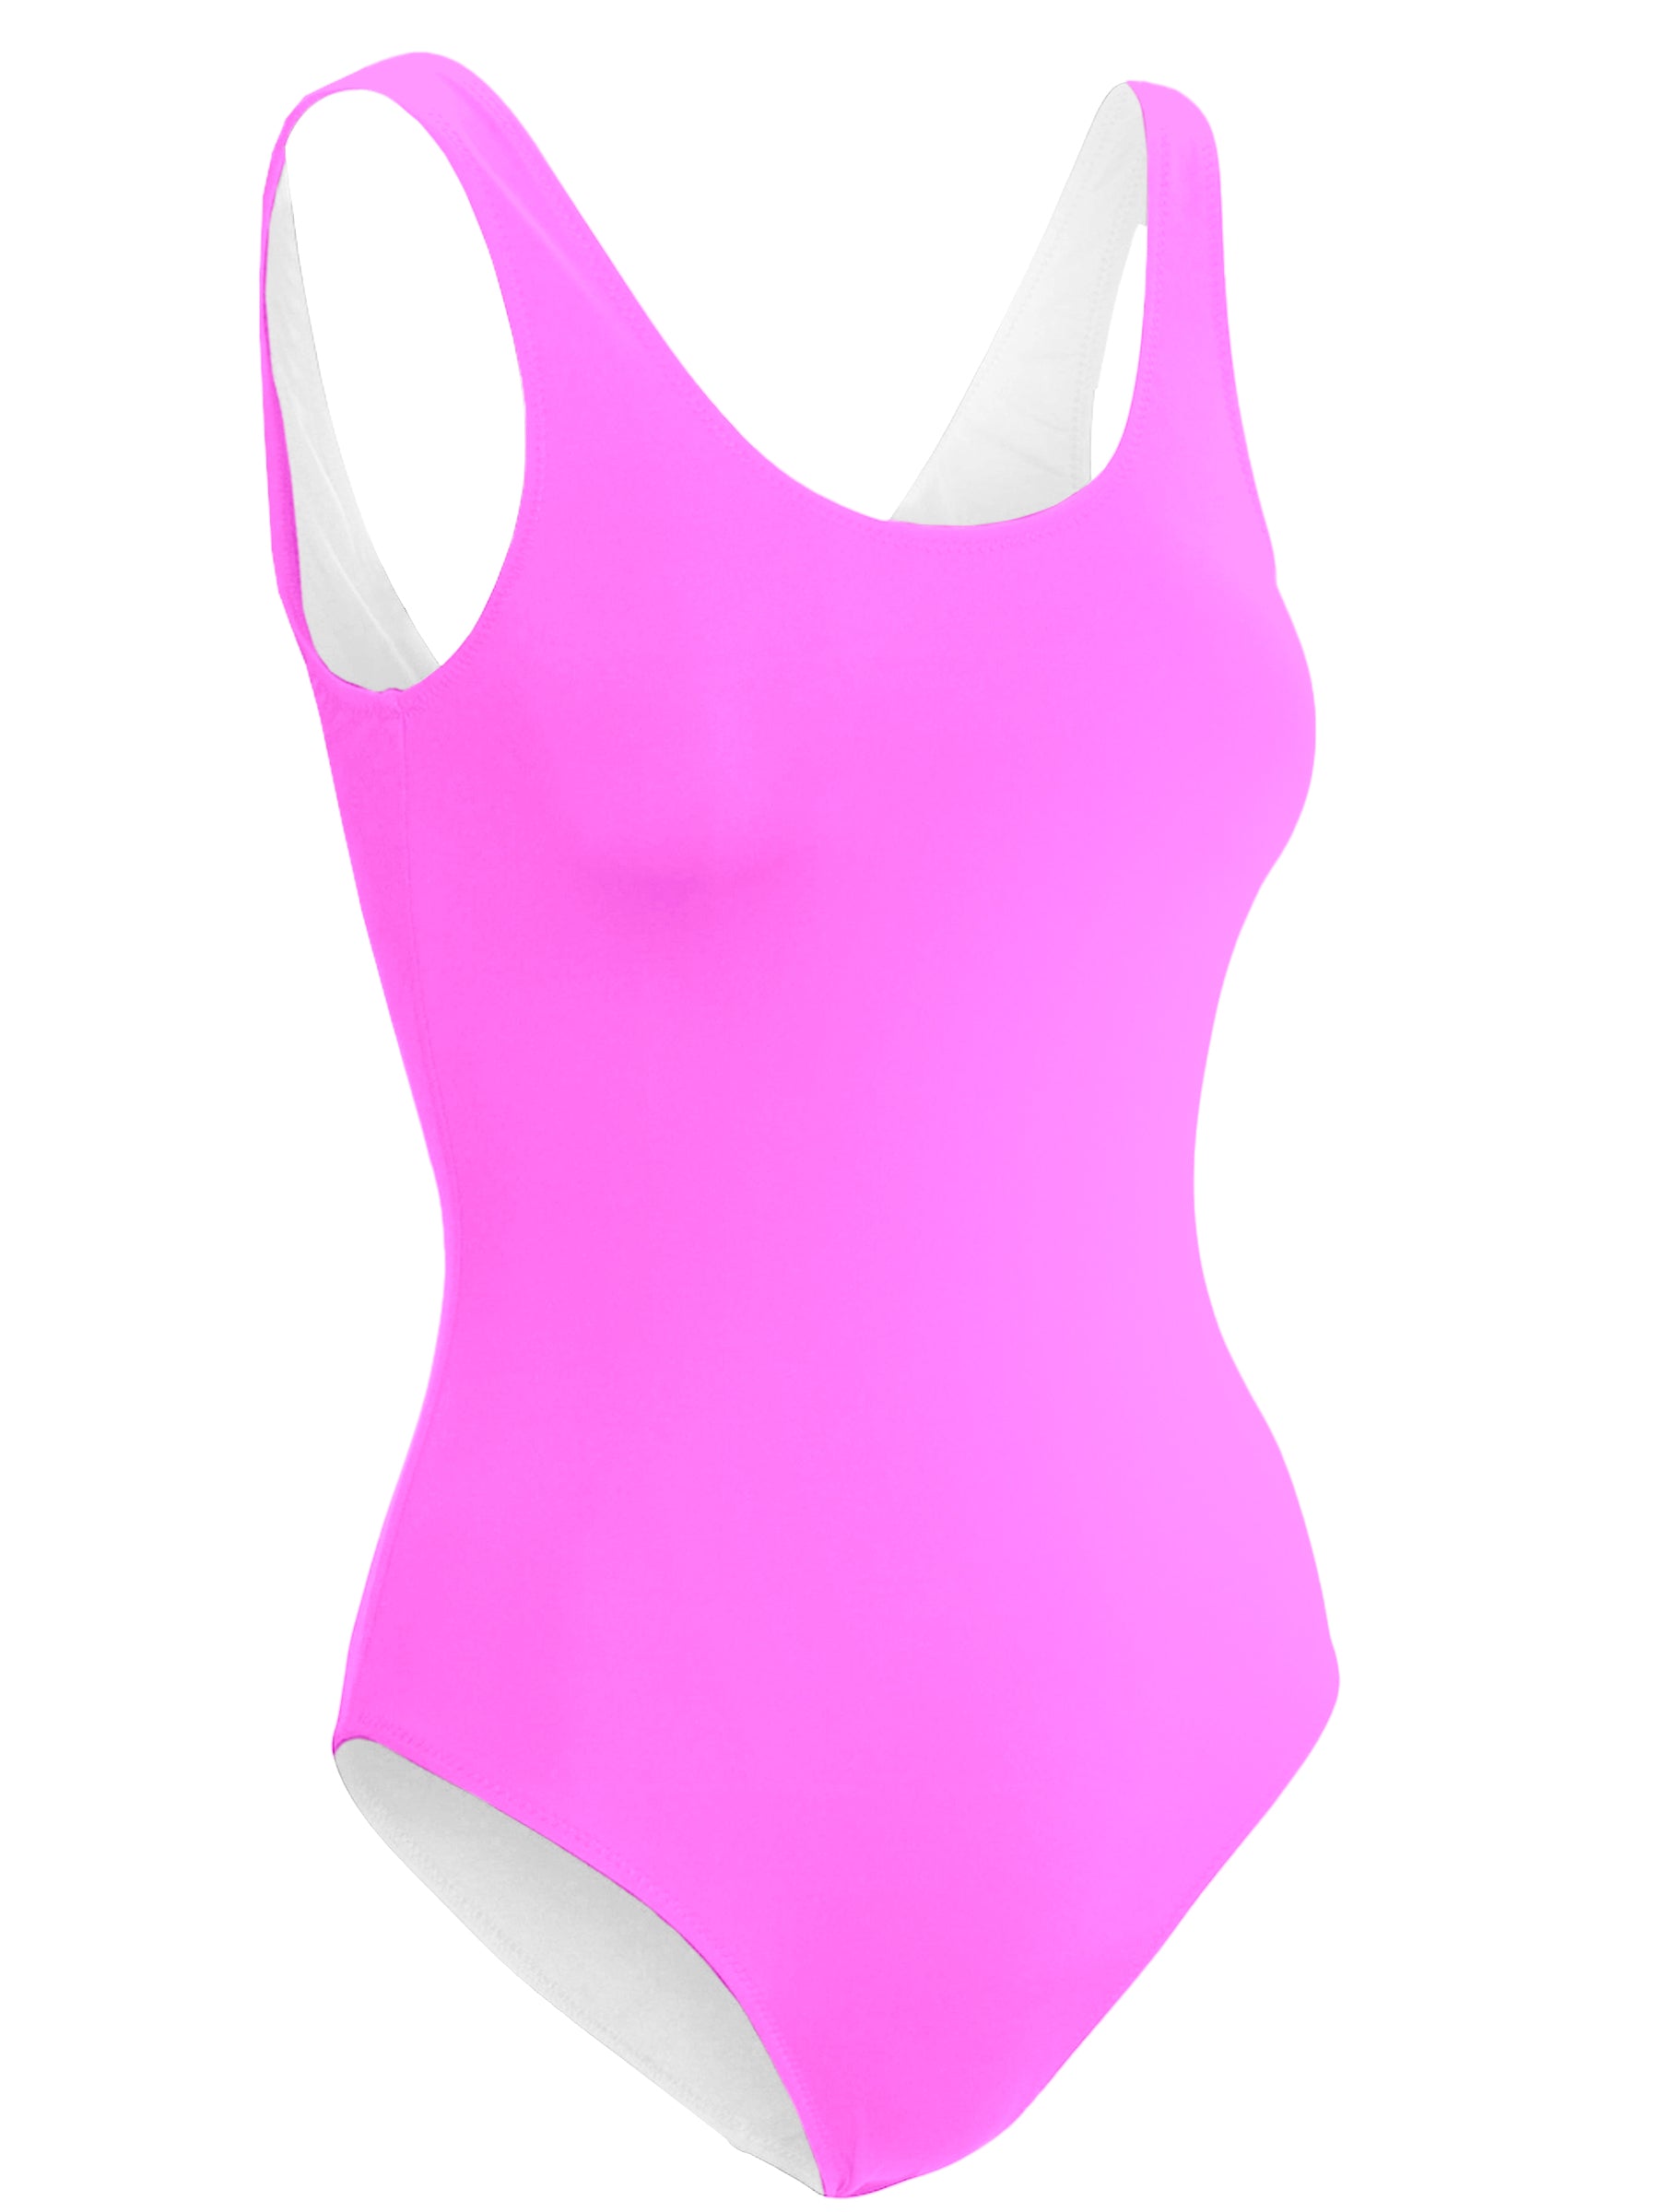 neon pink swimsuit for women